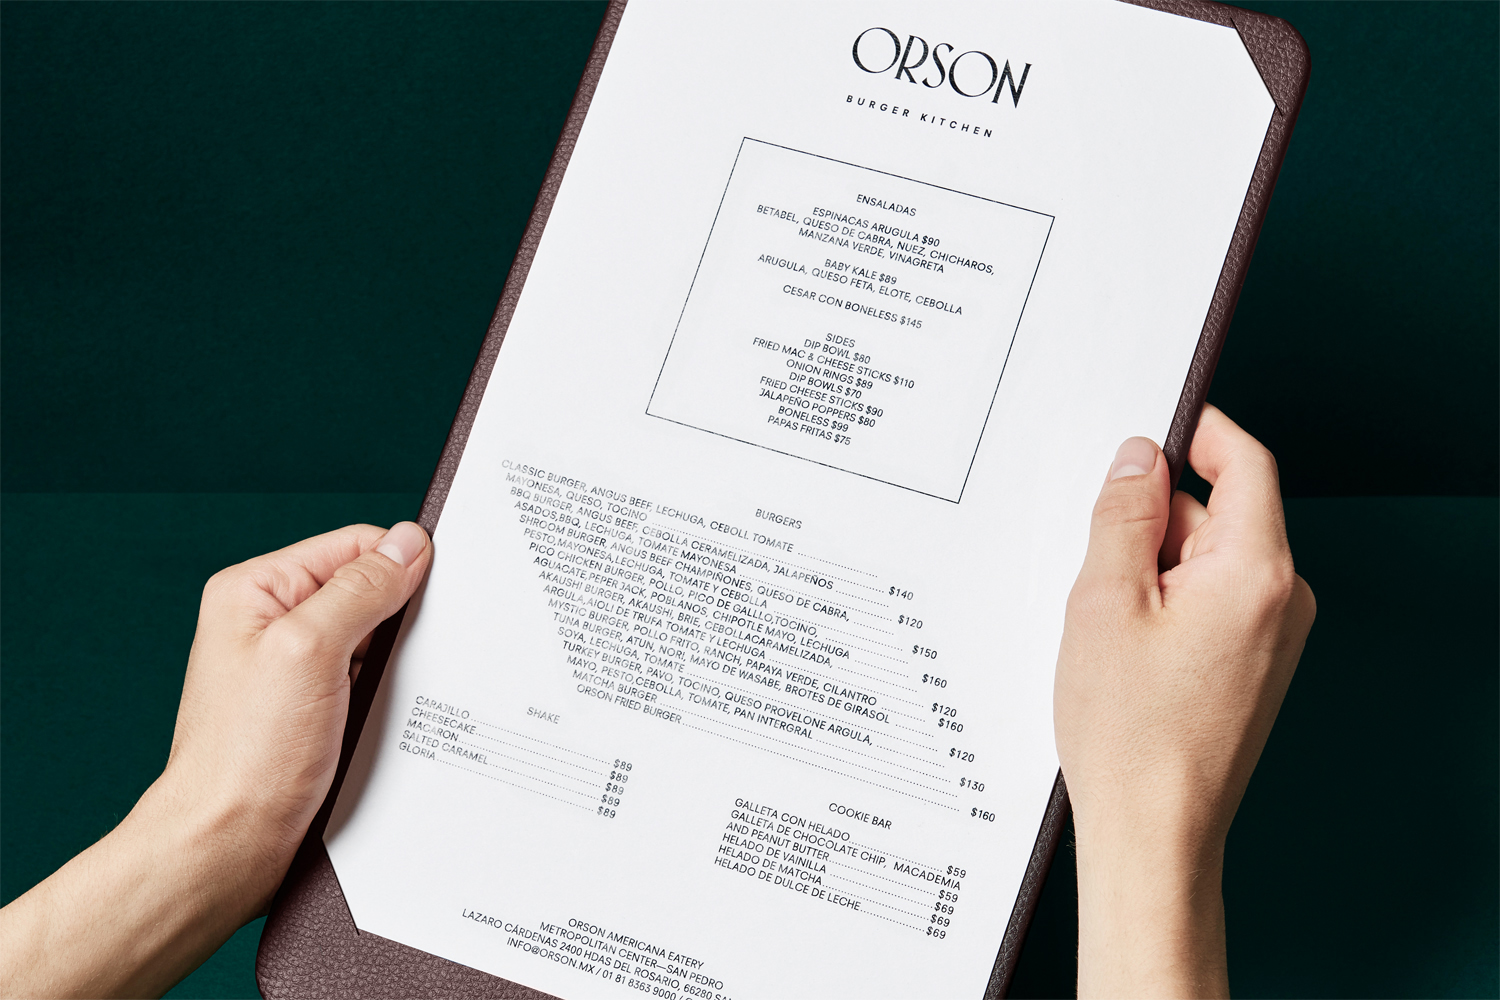 Brand identity and menu design by Anagrama for San Pedro based burger bar Orson